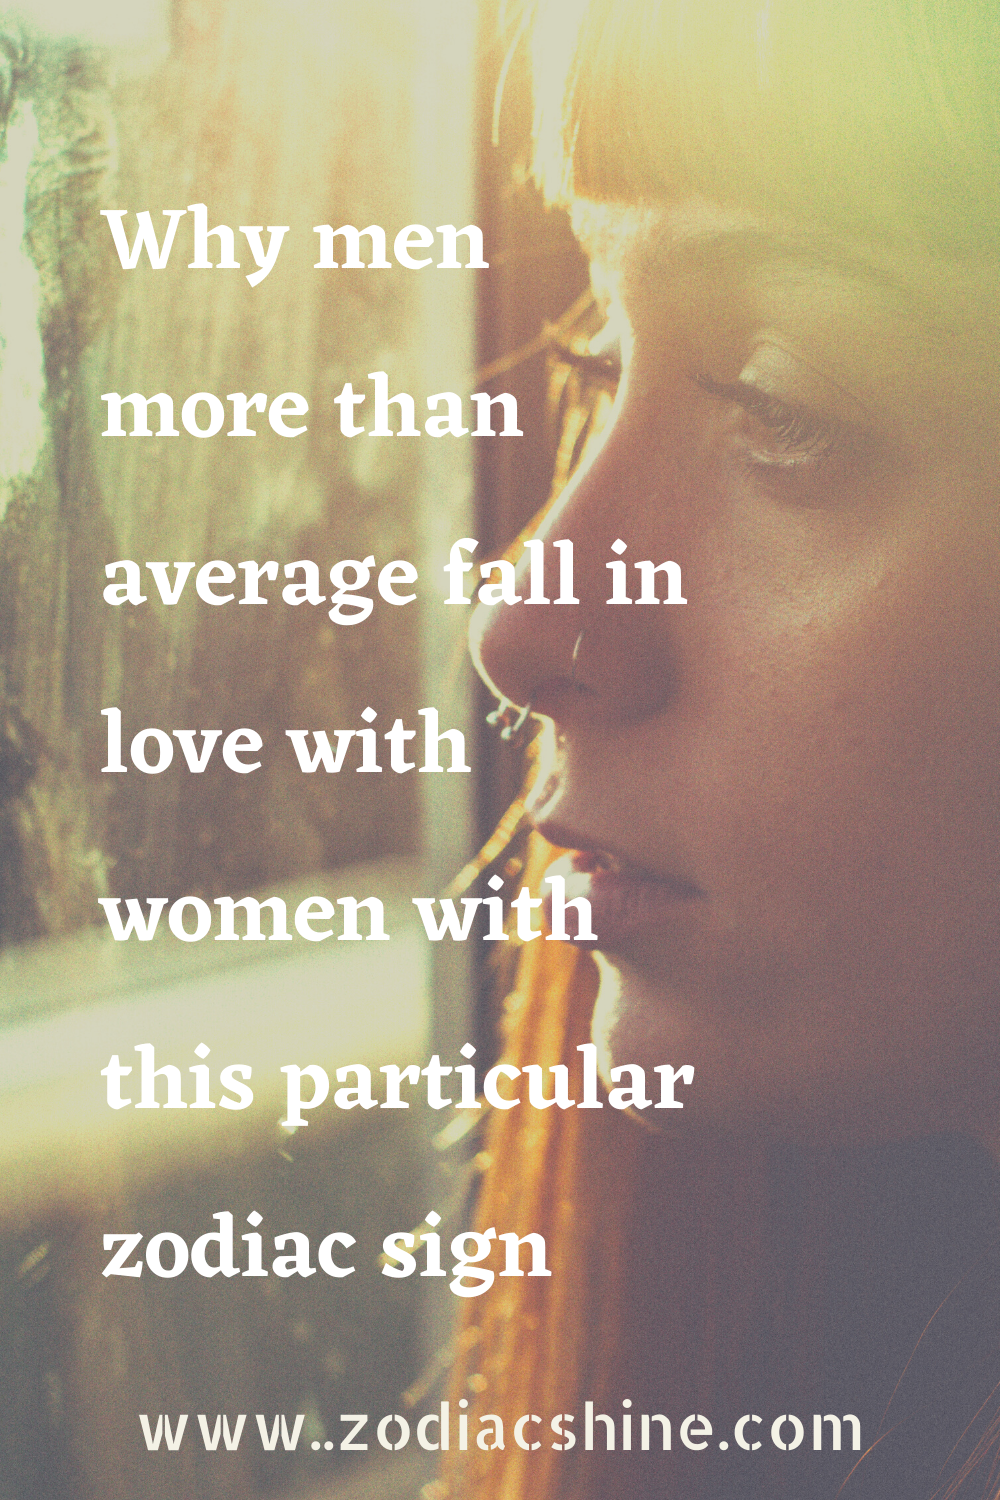 Why men more than average fall in love with women with this particular zodiac sign